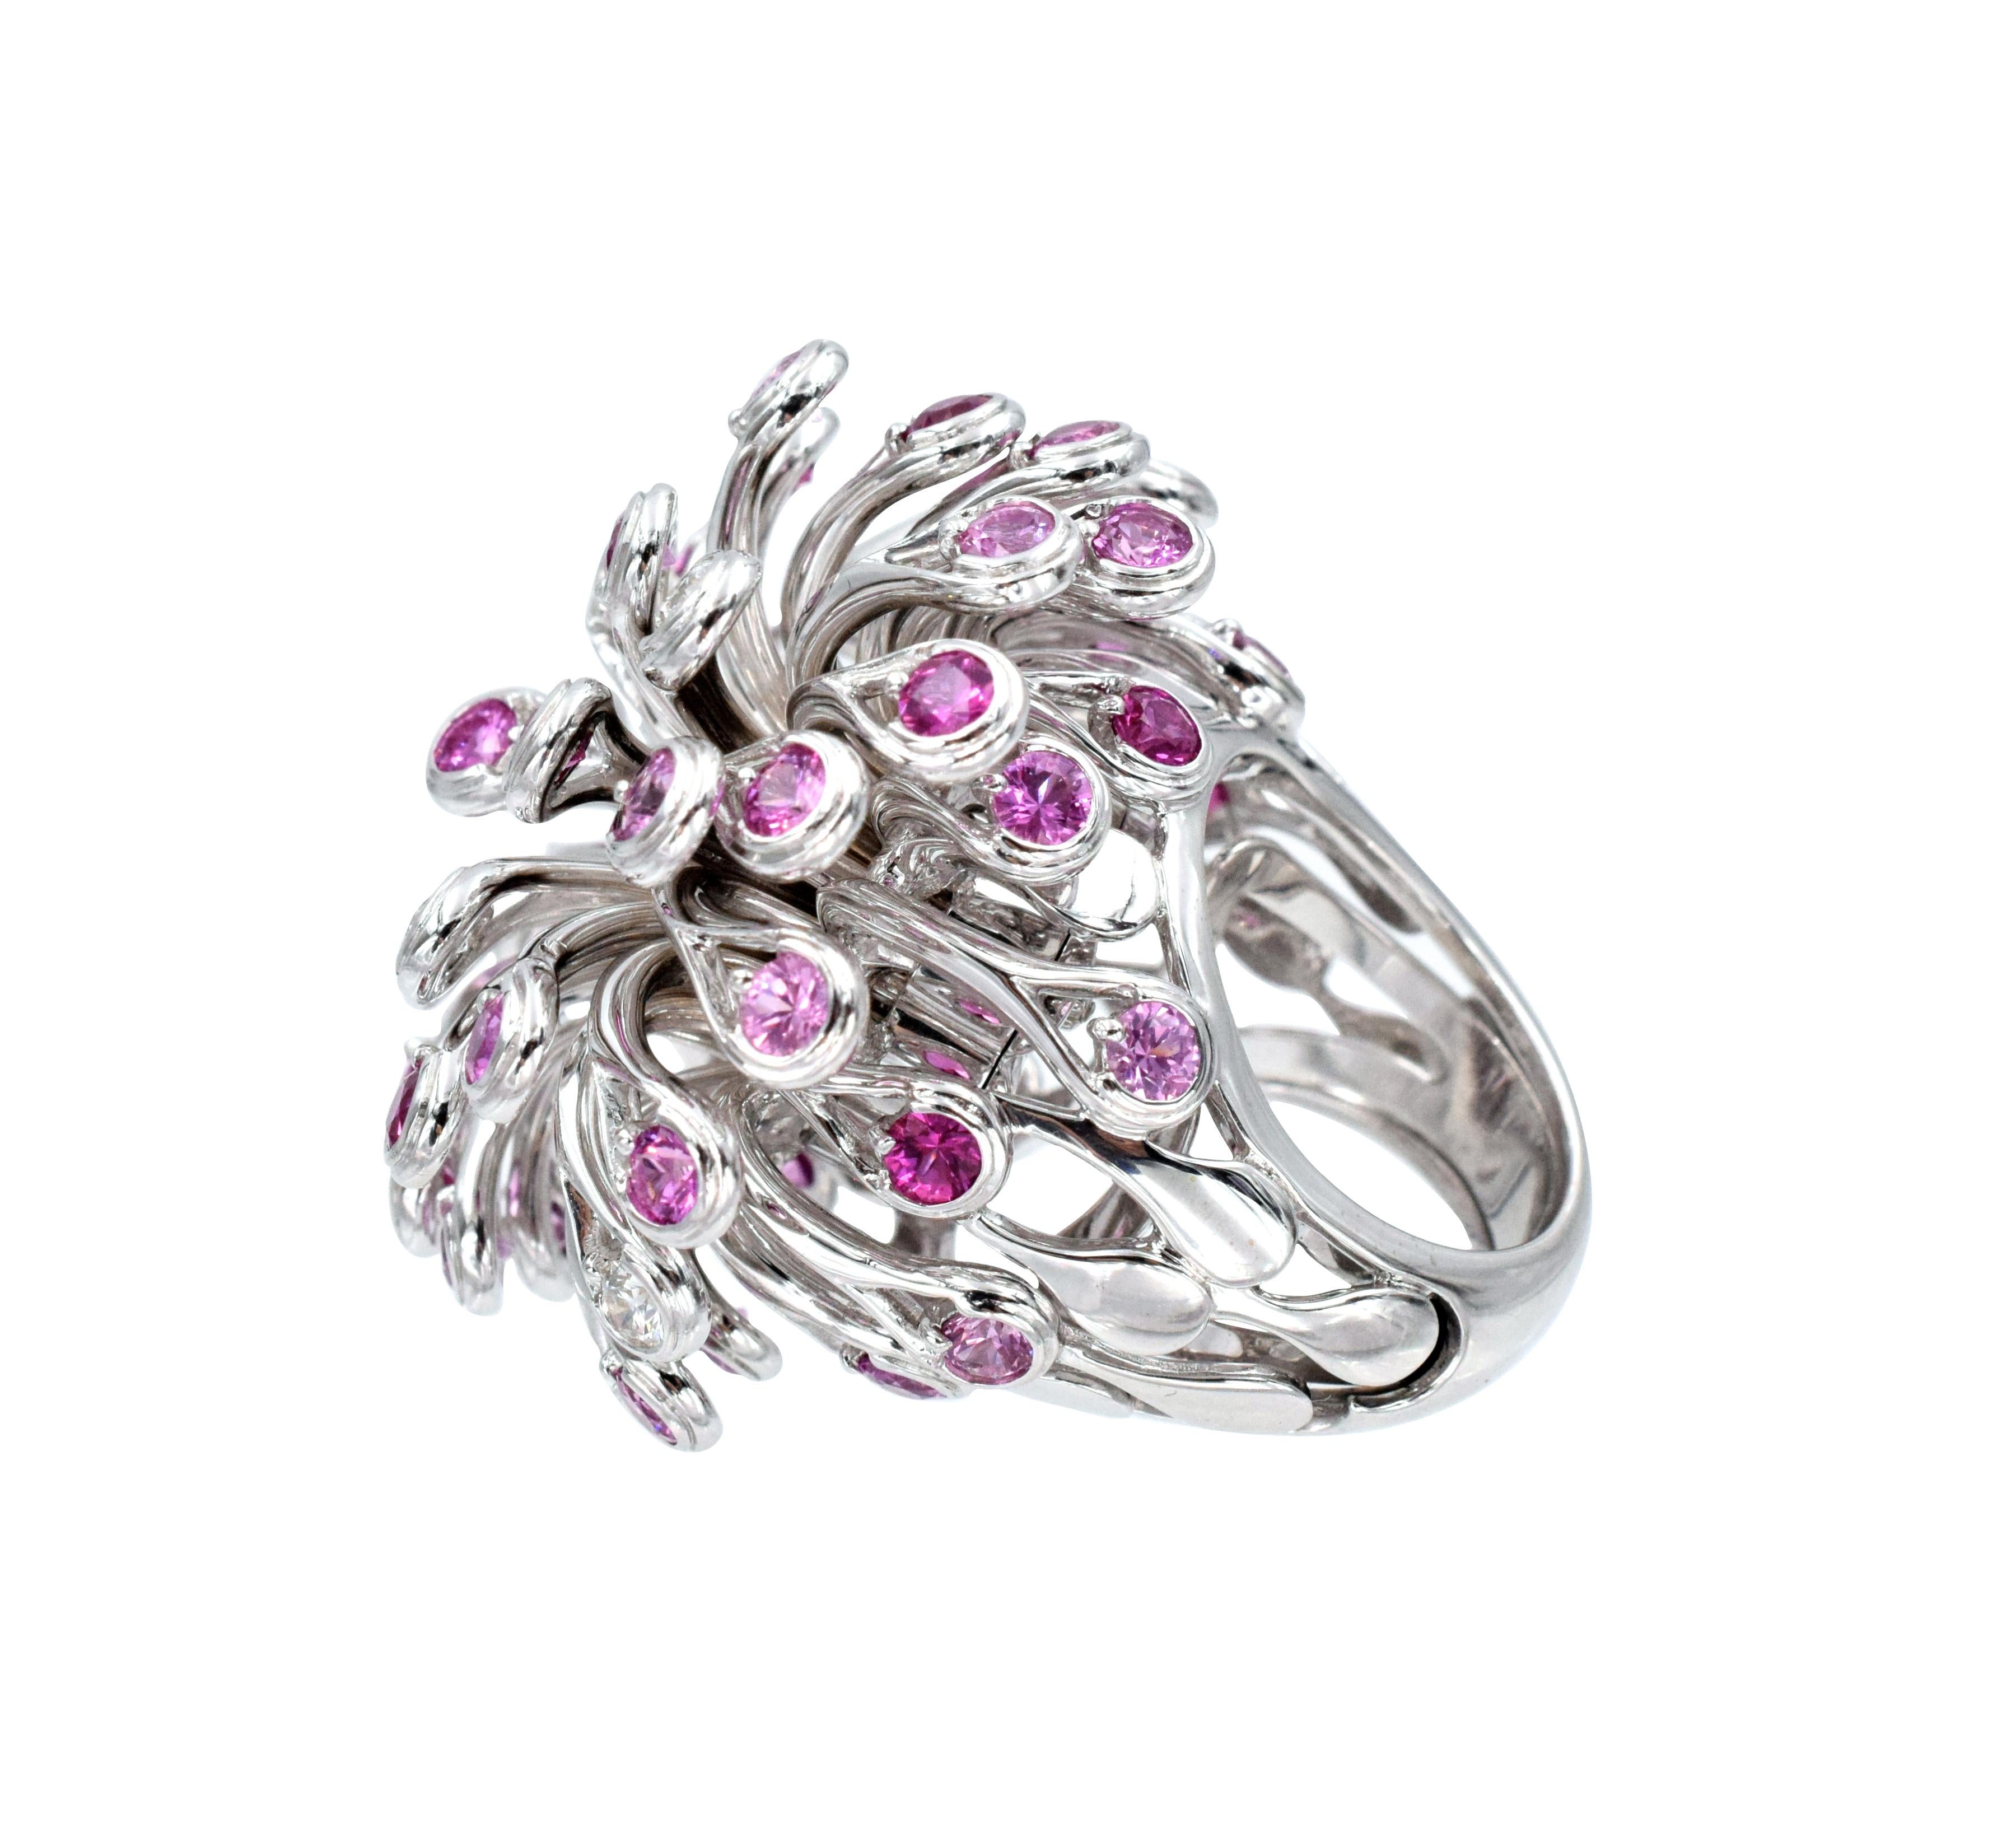 Christian Dior Diamond and Pink Sapphire Ring. This ring has approximately 0.6ct of round brilliant diamonds and approximately 7.5ct of pink sapphires all set in 18k white gold. Signed Dior, 750, E8797. Weight: 59.7g. Ring size: 6.25